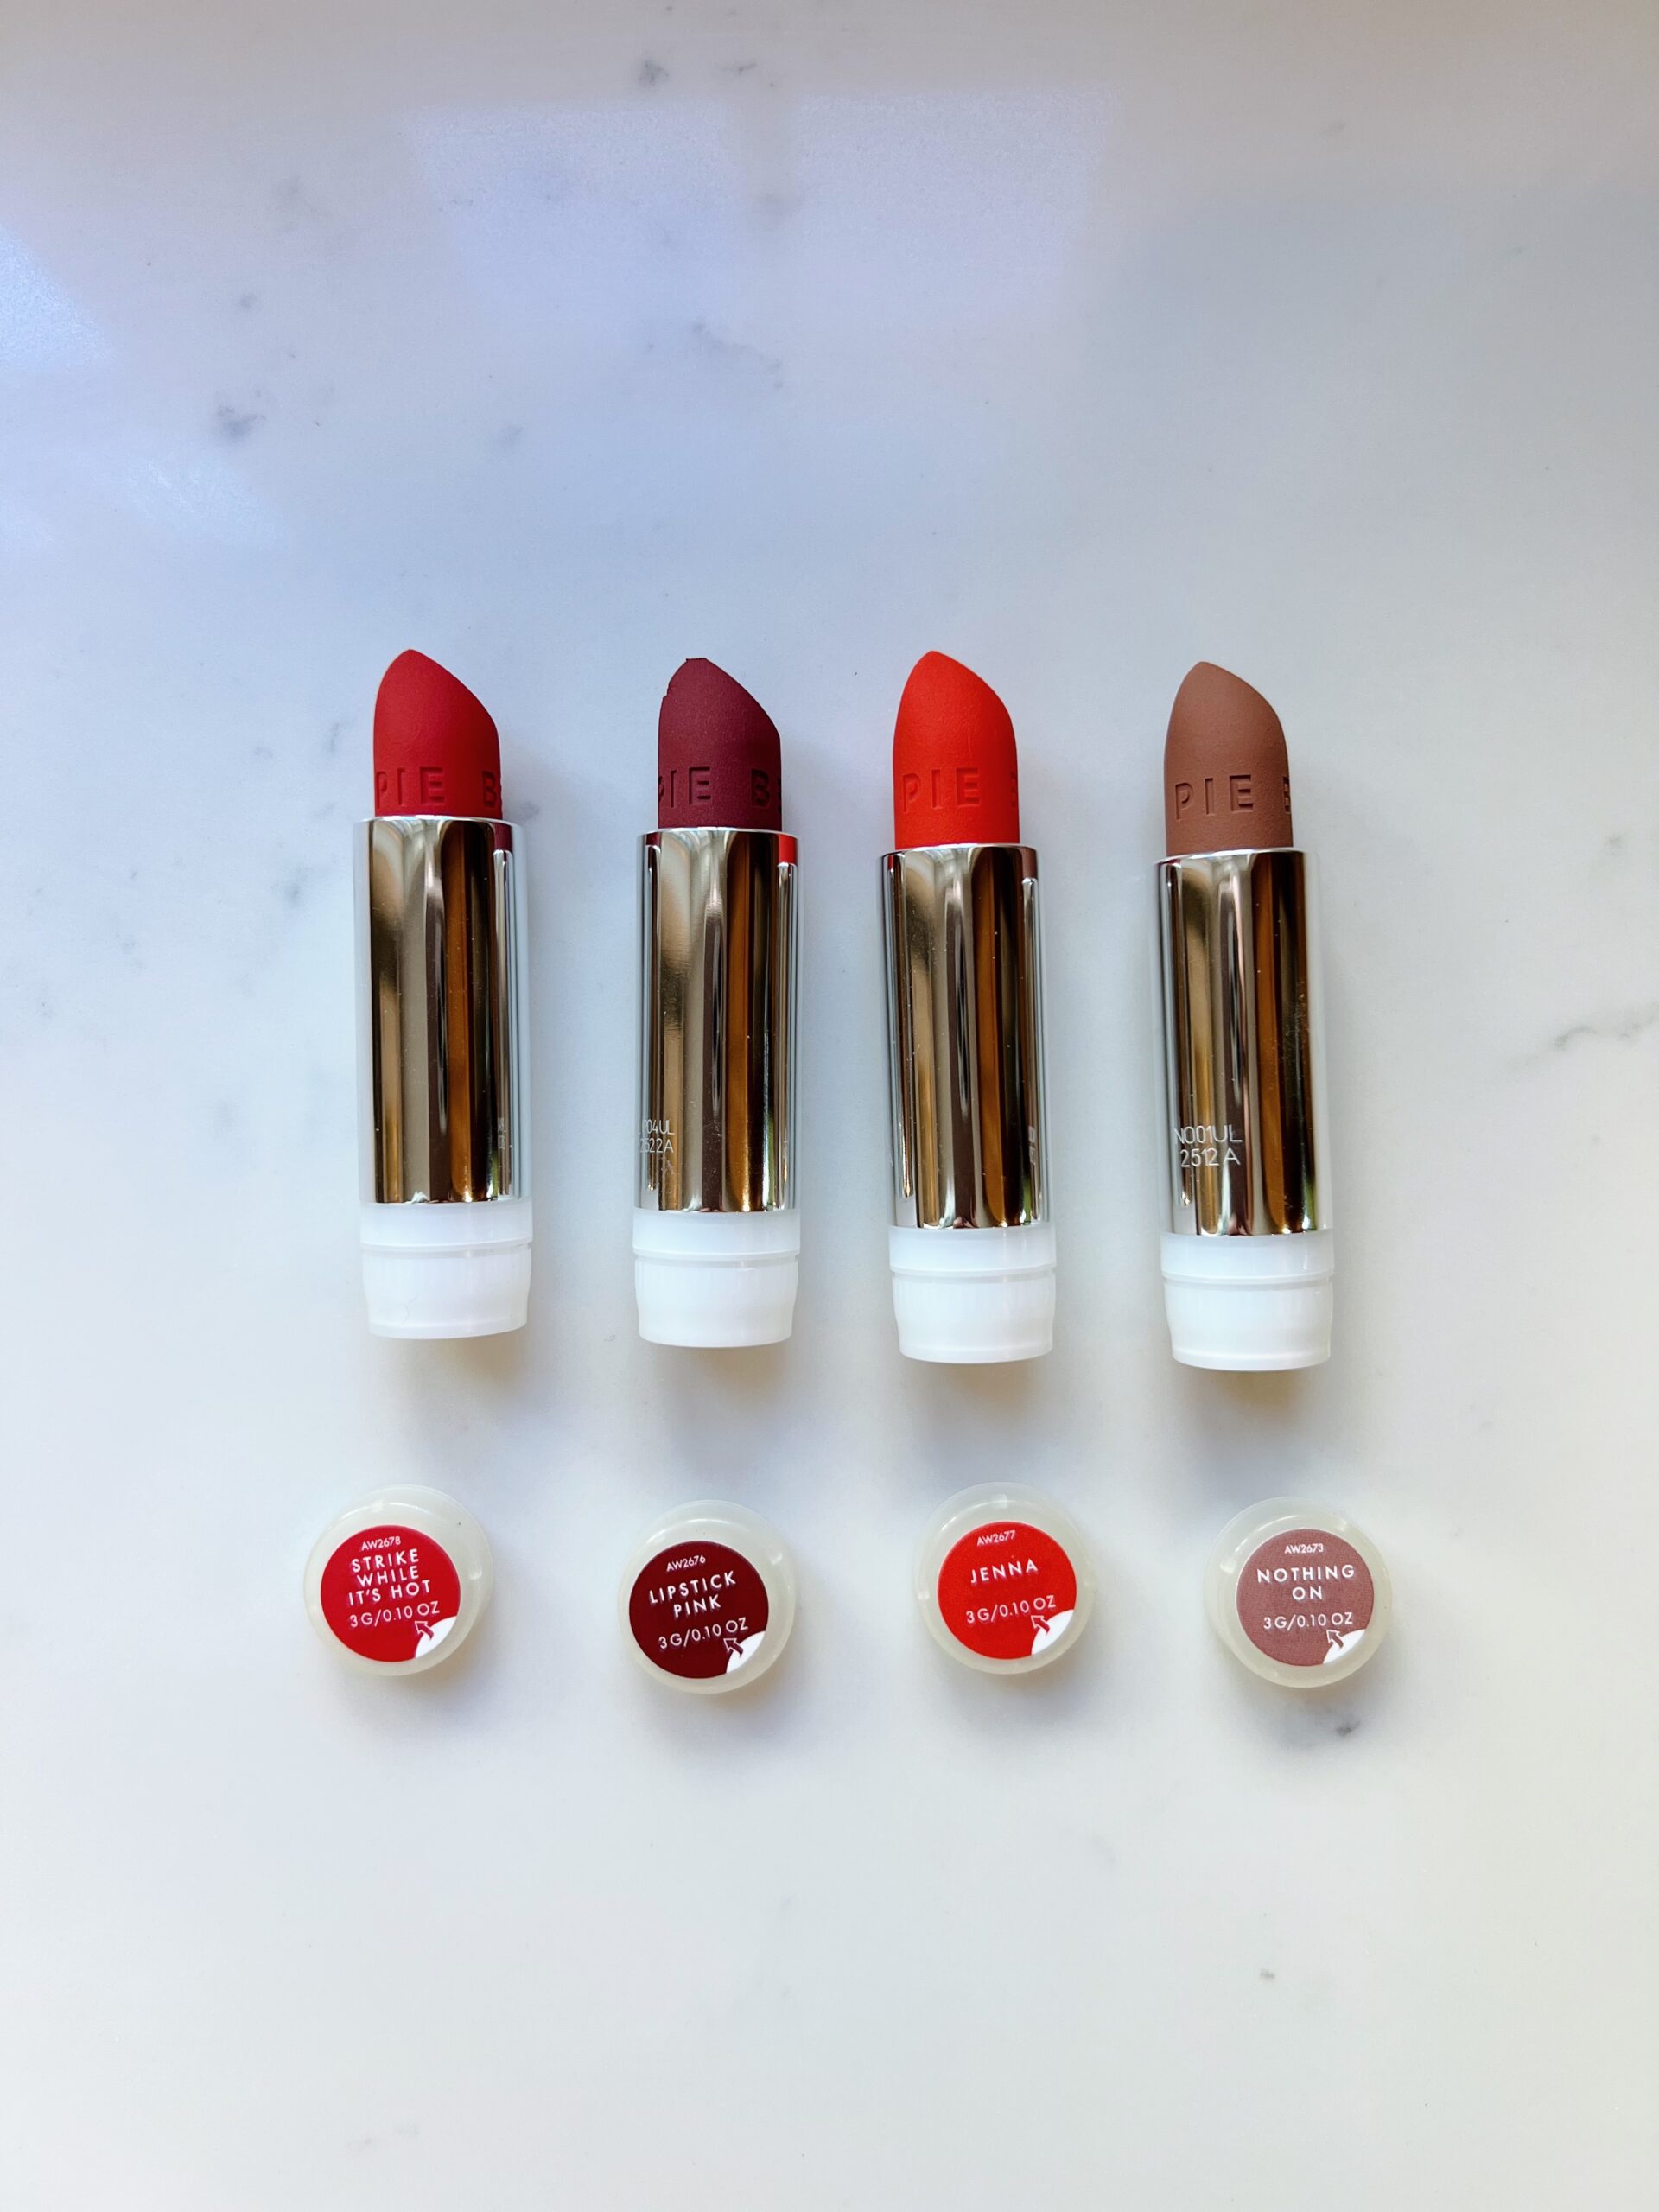 the unlipstick in 4 different shades